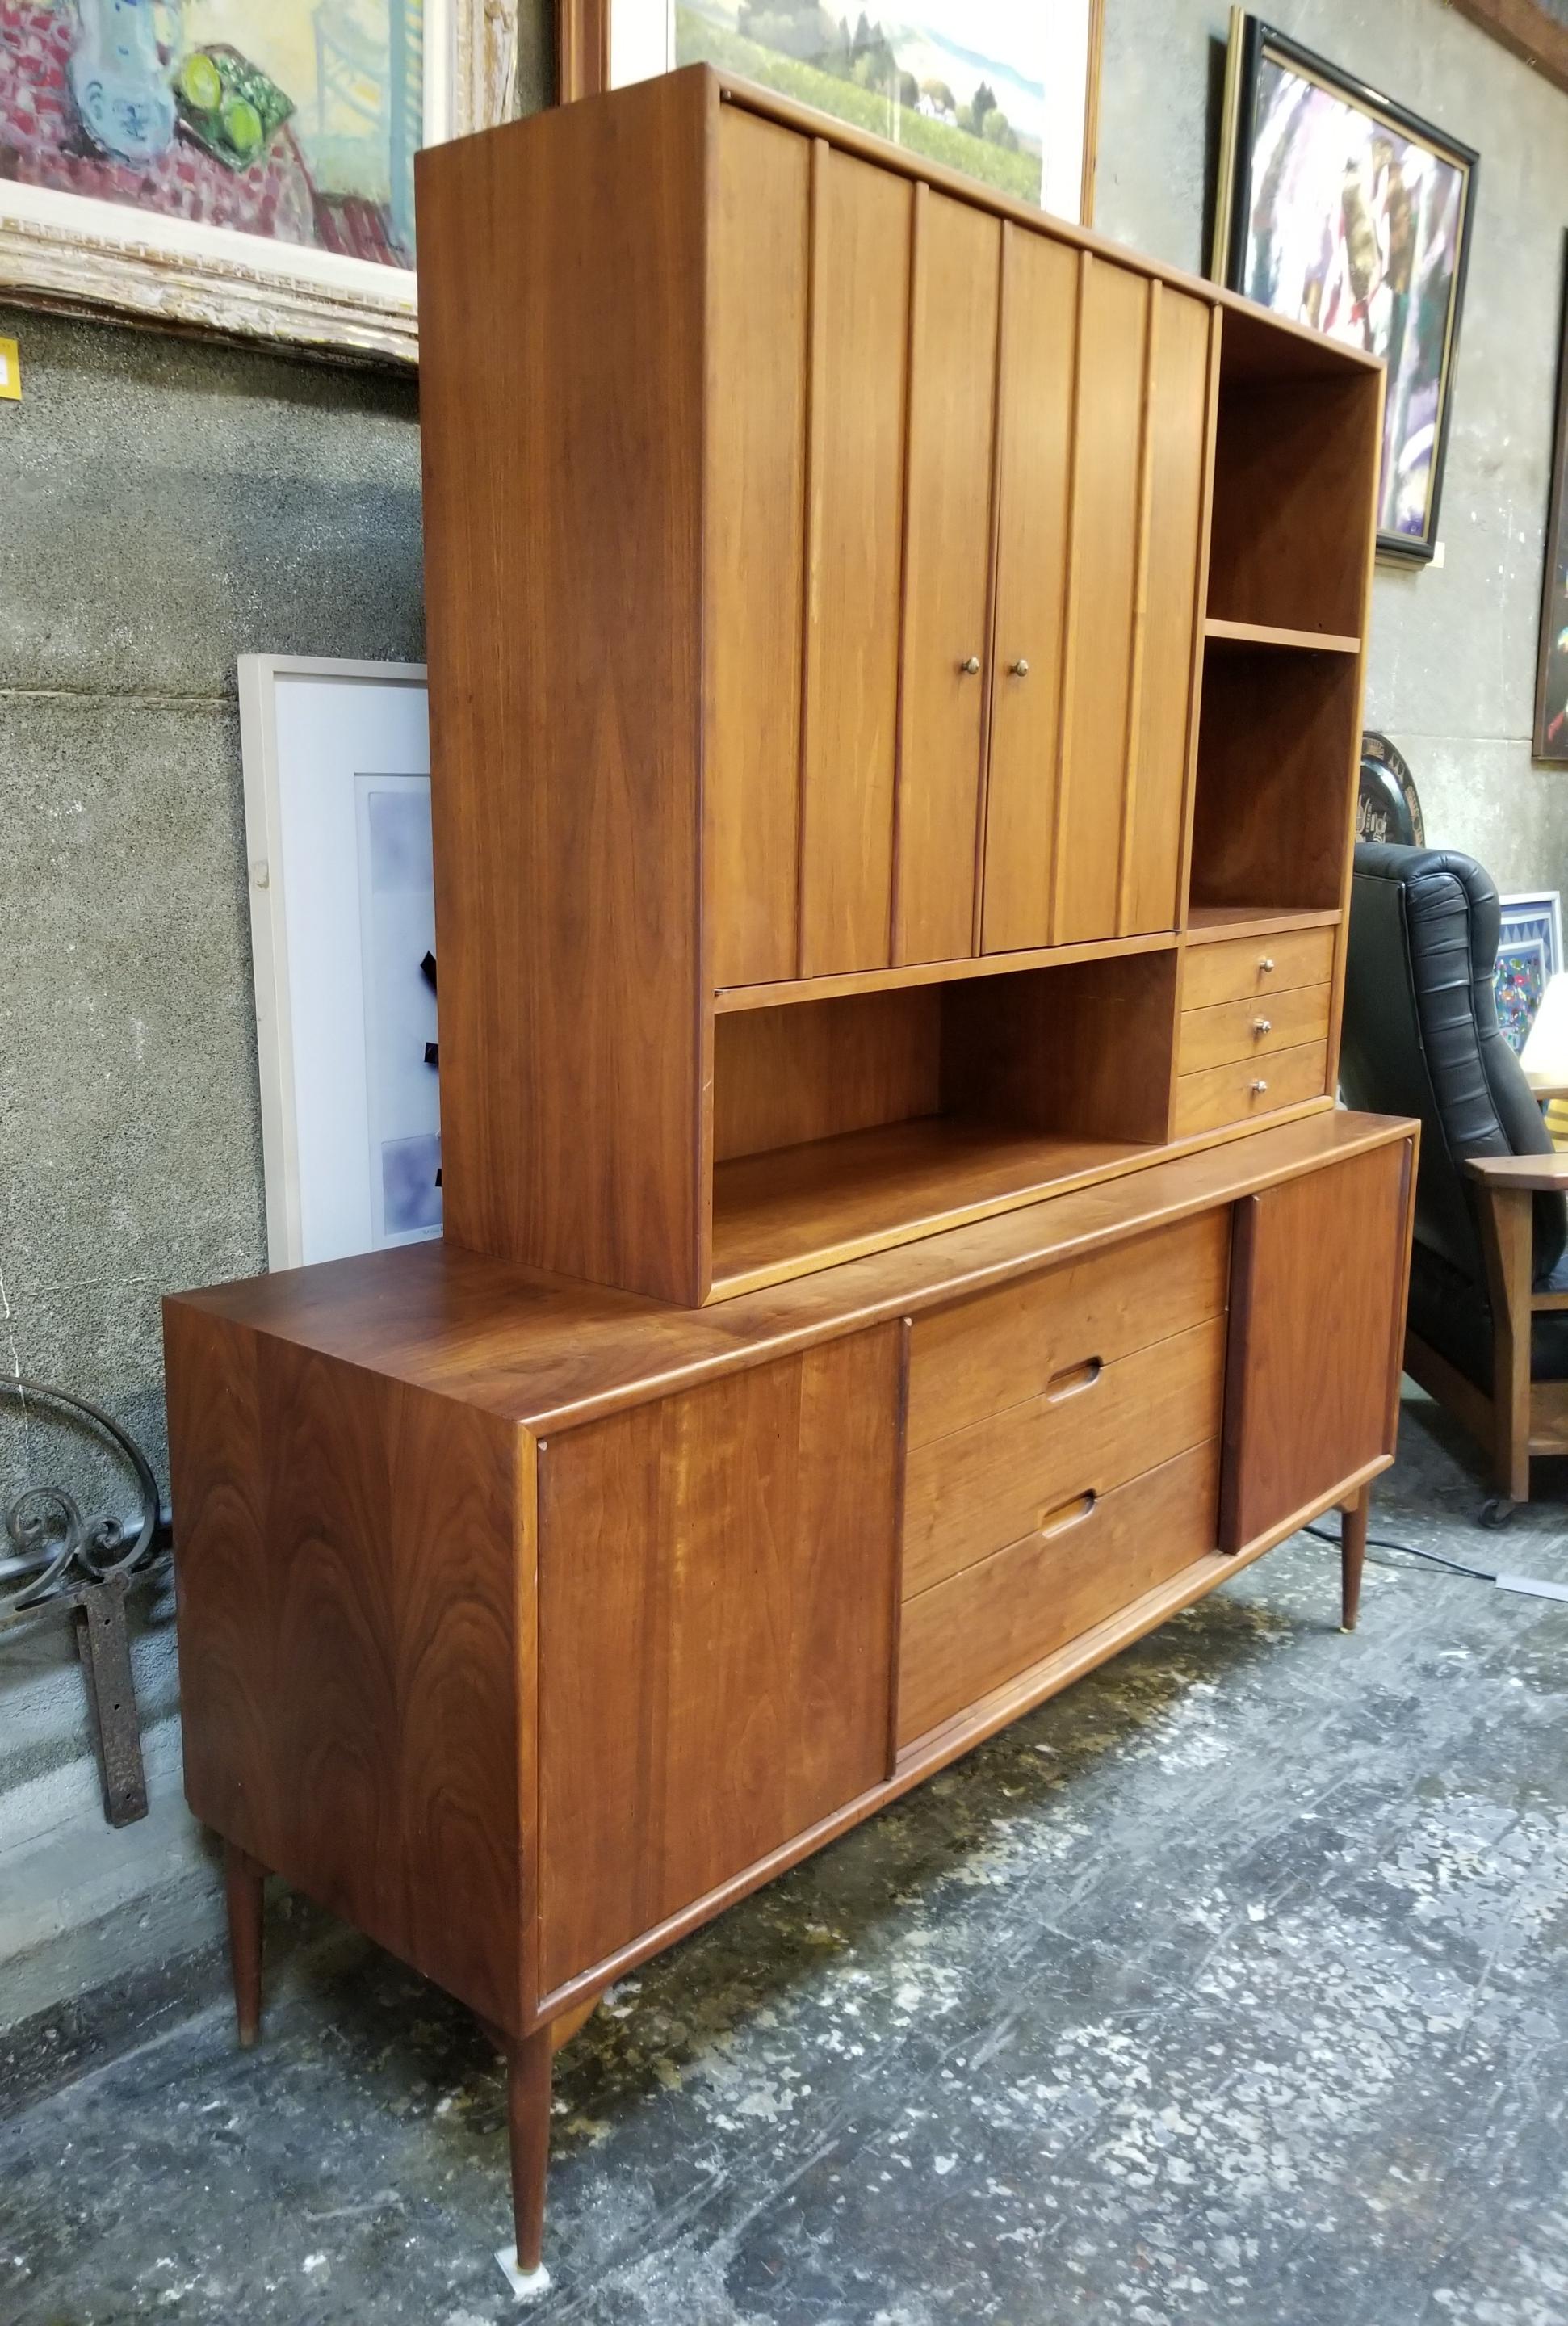 A two piece storage cabinet designed by John Keal for Brown-Saltman of California. Features two sliding doors opening to storage with adjustable shelf interior and three center drawers. Upper unit consists of three small drawers, open shelving and a